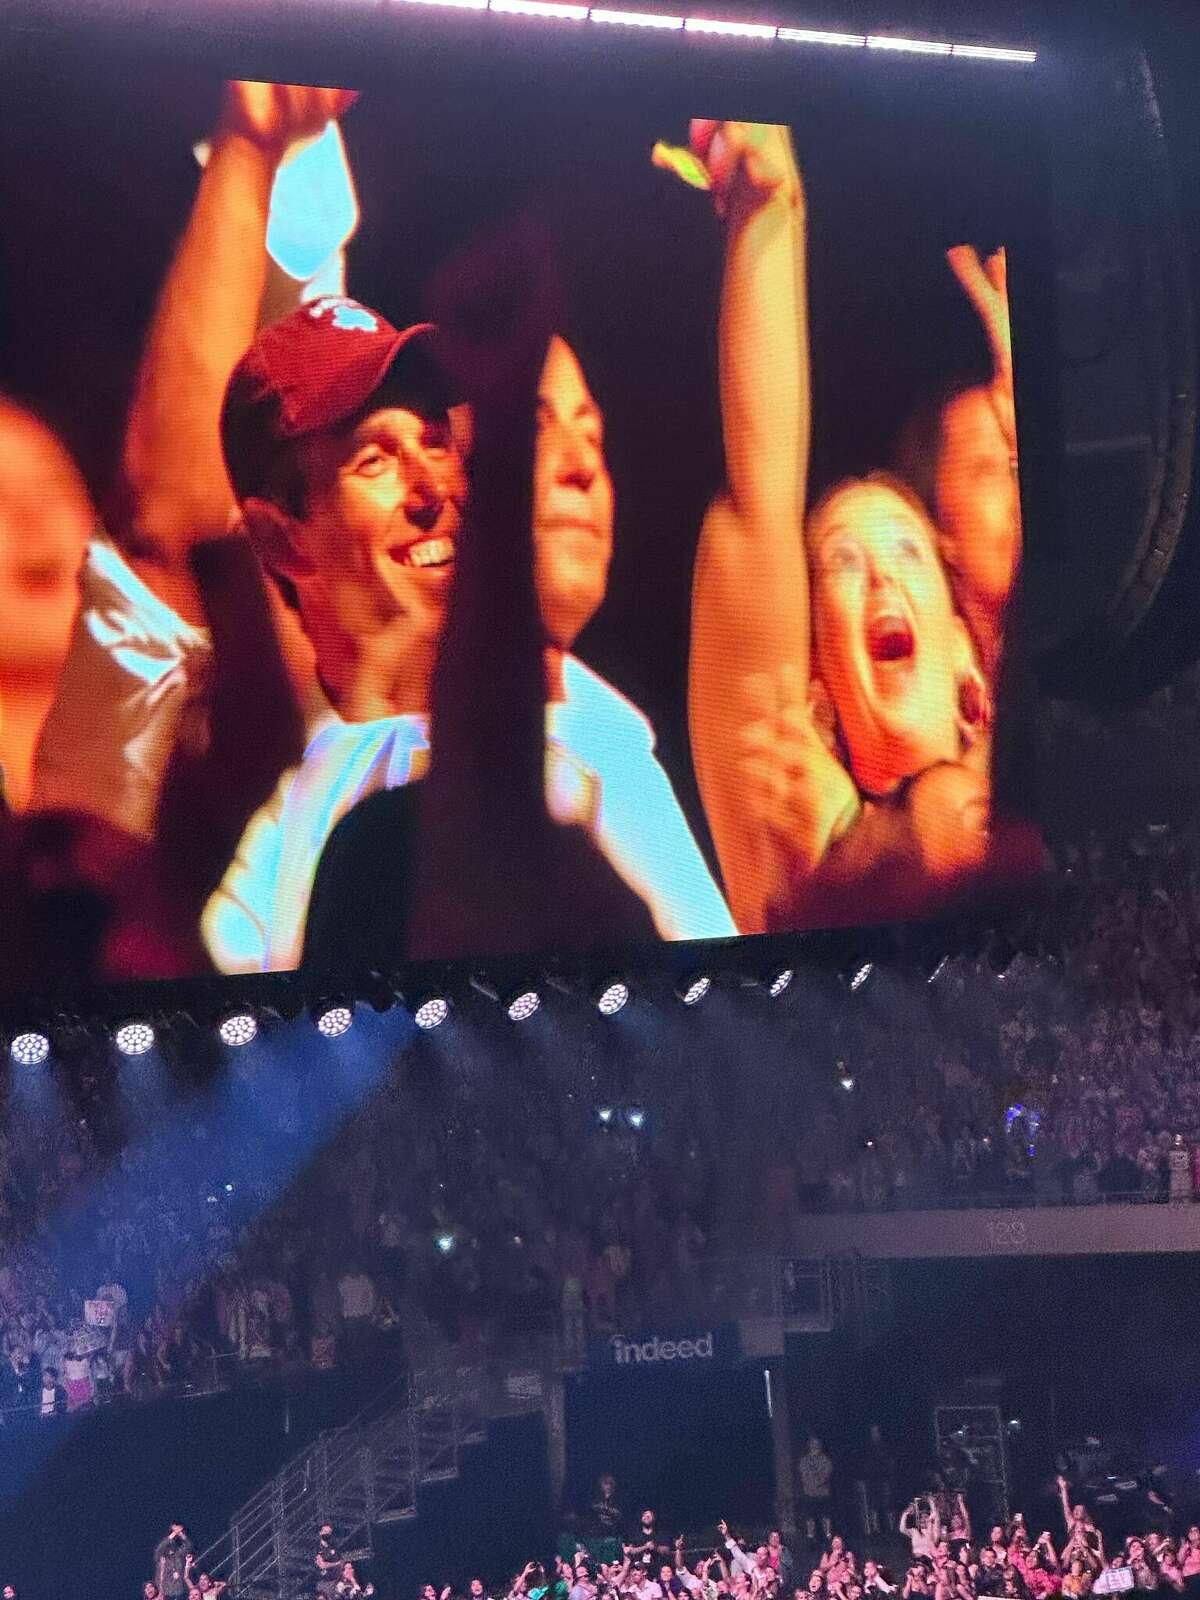 Beto O'Rourke was at Harry Styles' concert in Austin over the weekend.